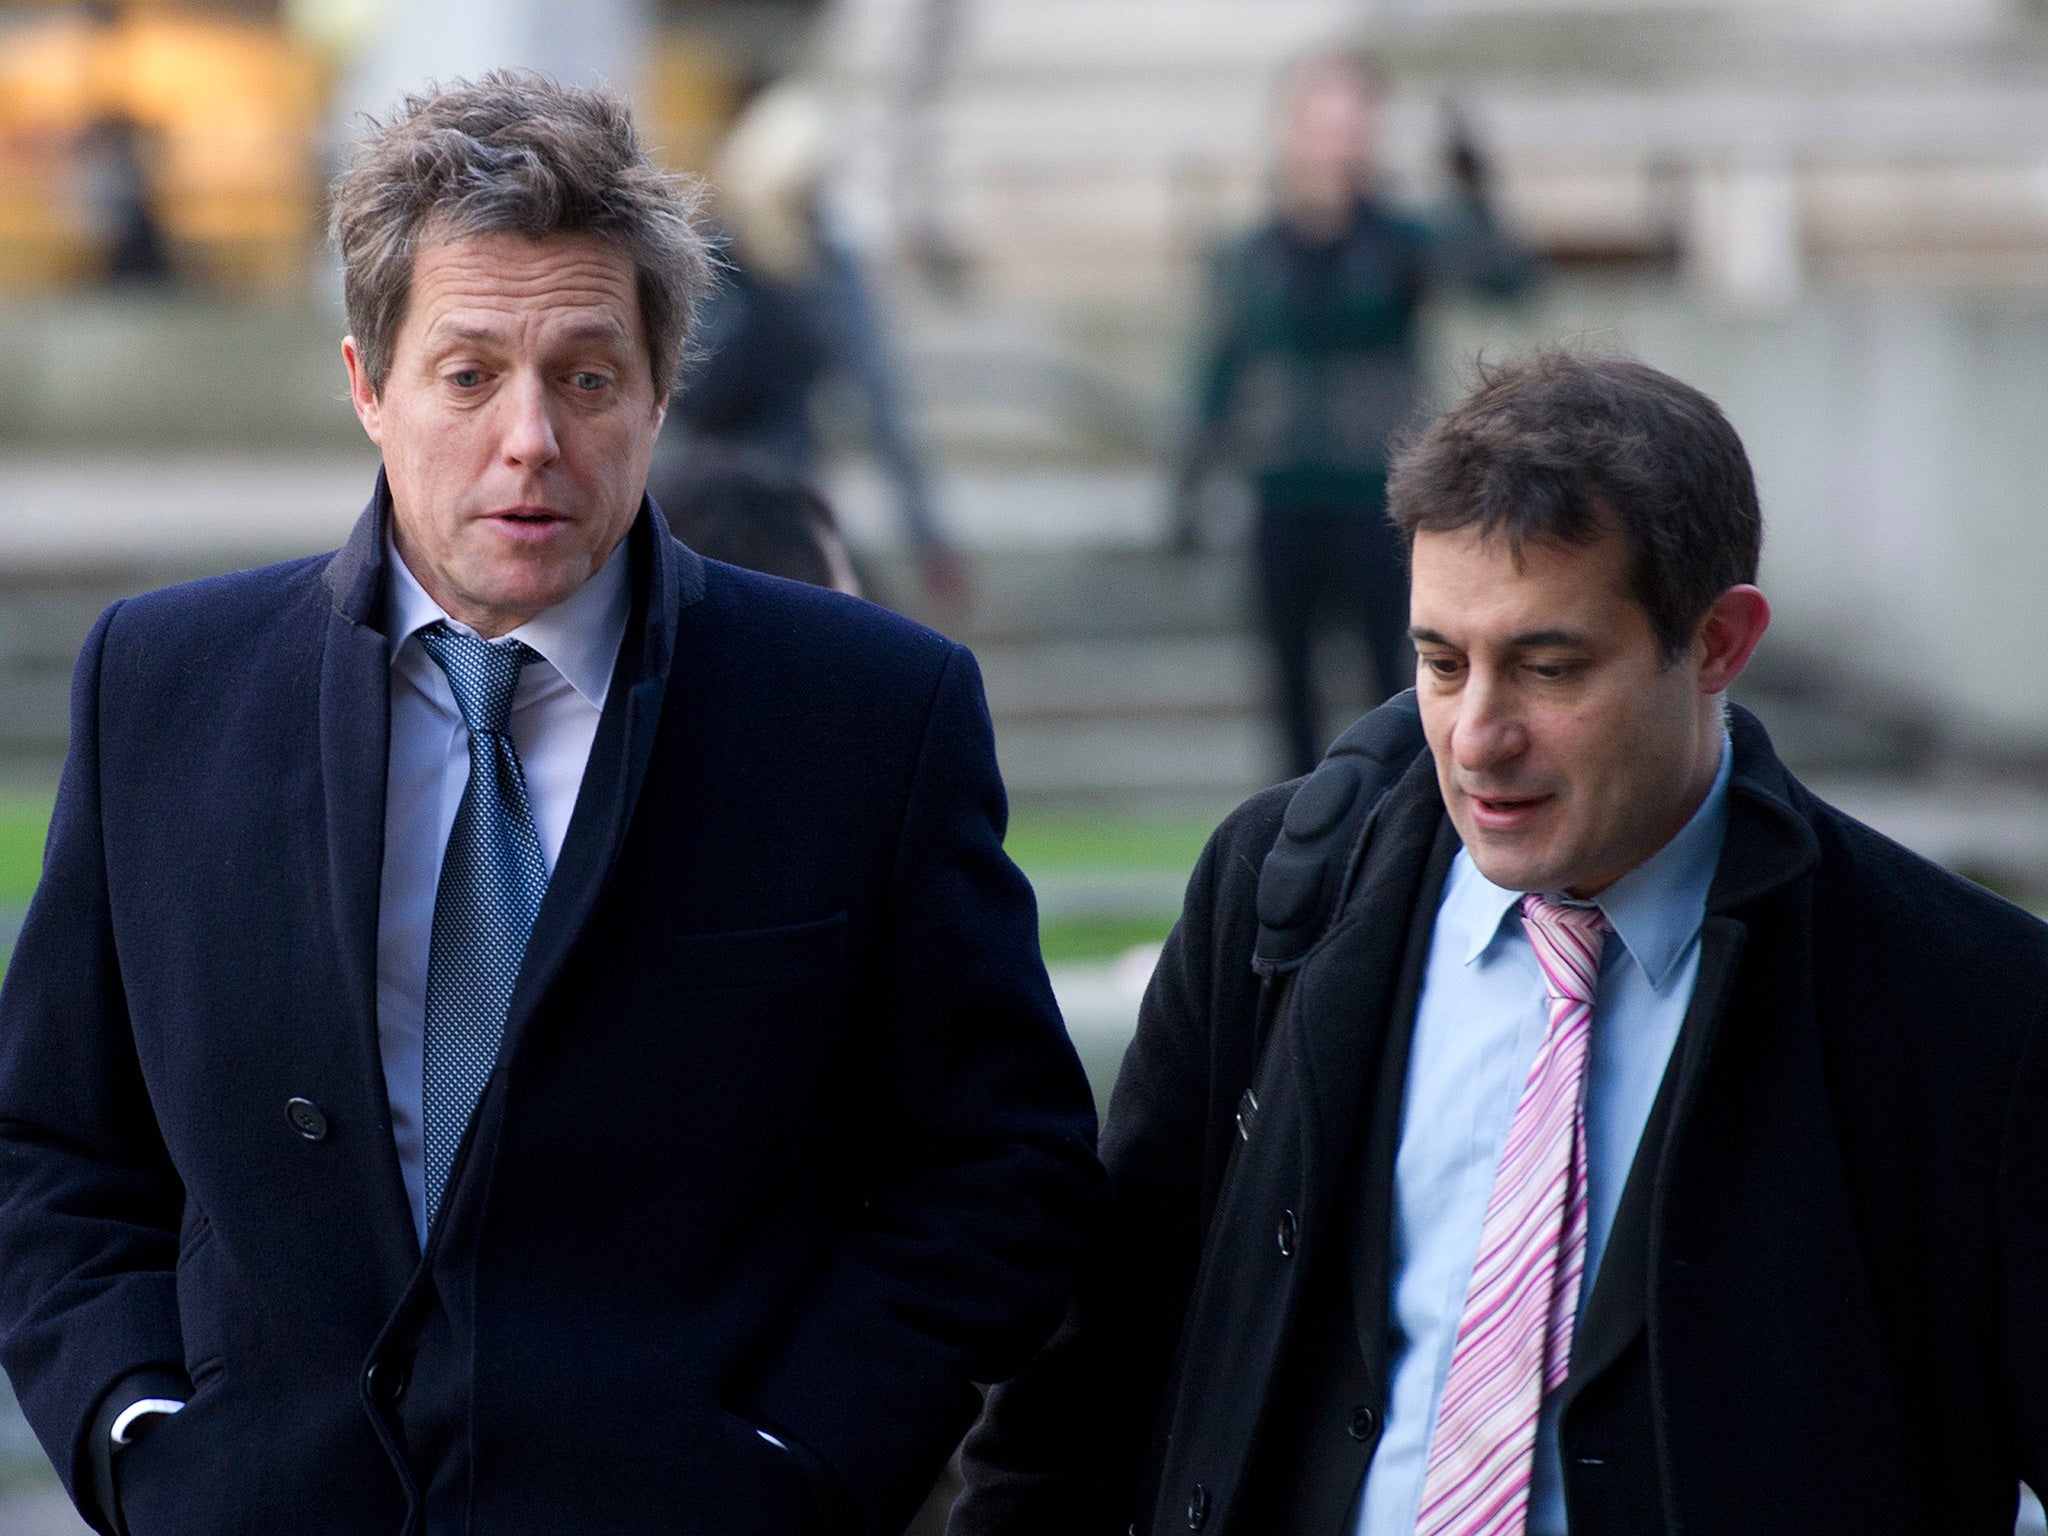 Hugh Grant with 'Hacked Off' spokesman Evan Harris. Grant came forward with a claim against Trinity Mirror earlier this week.